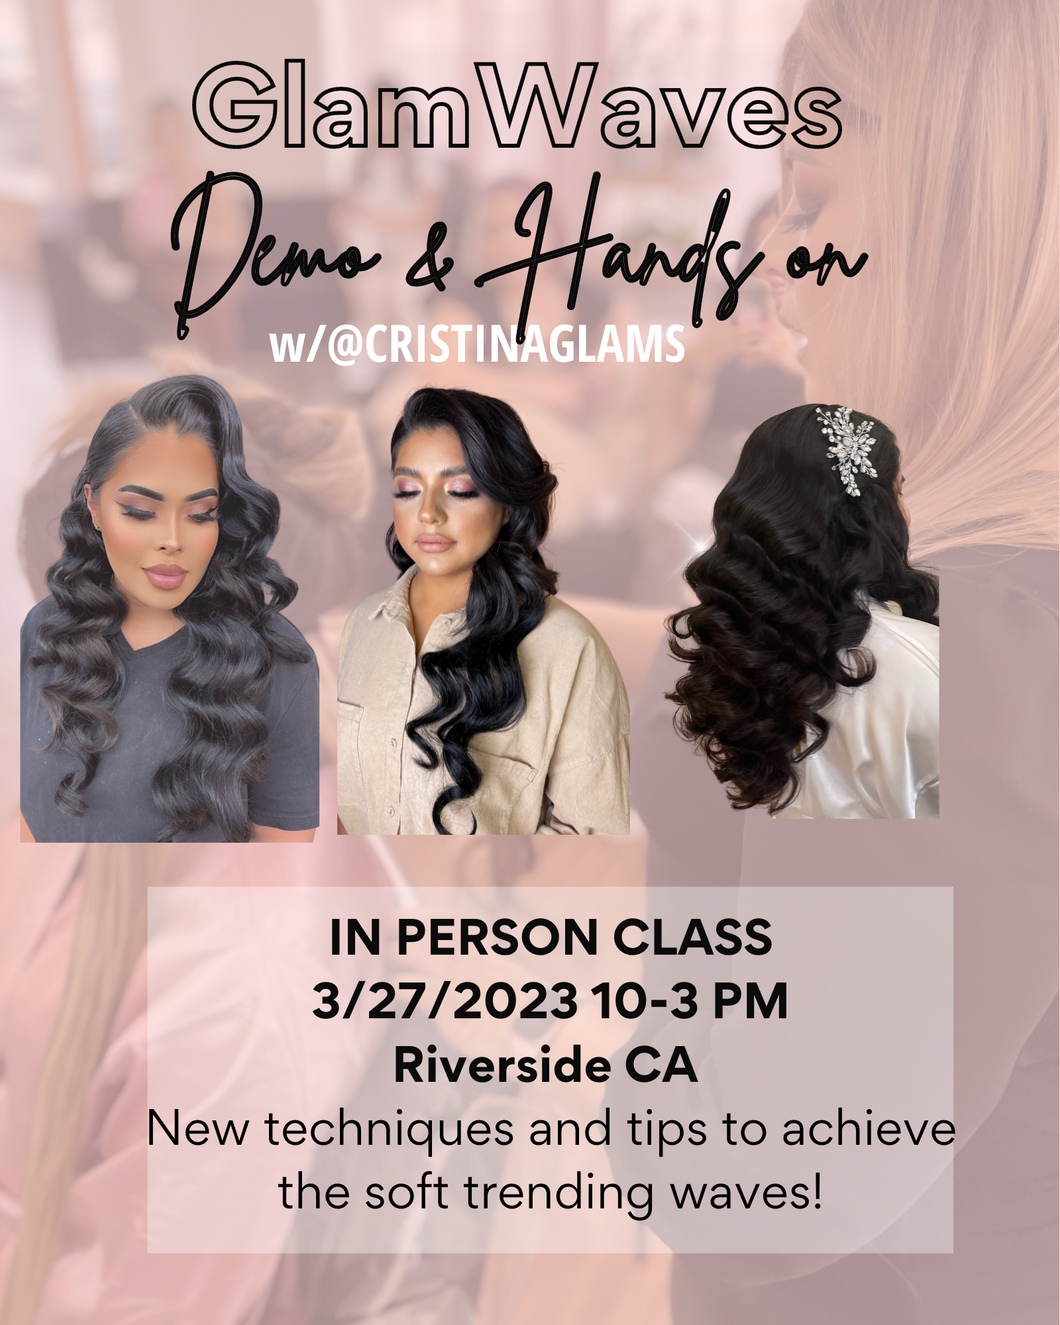 GlamWaves Class 3/27 Demo and Hands on